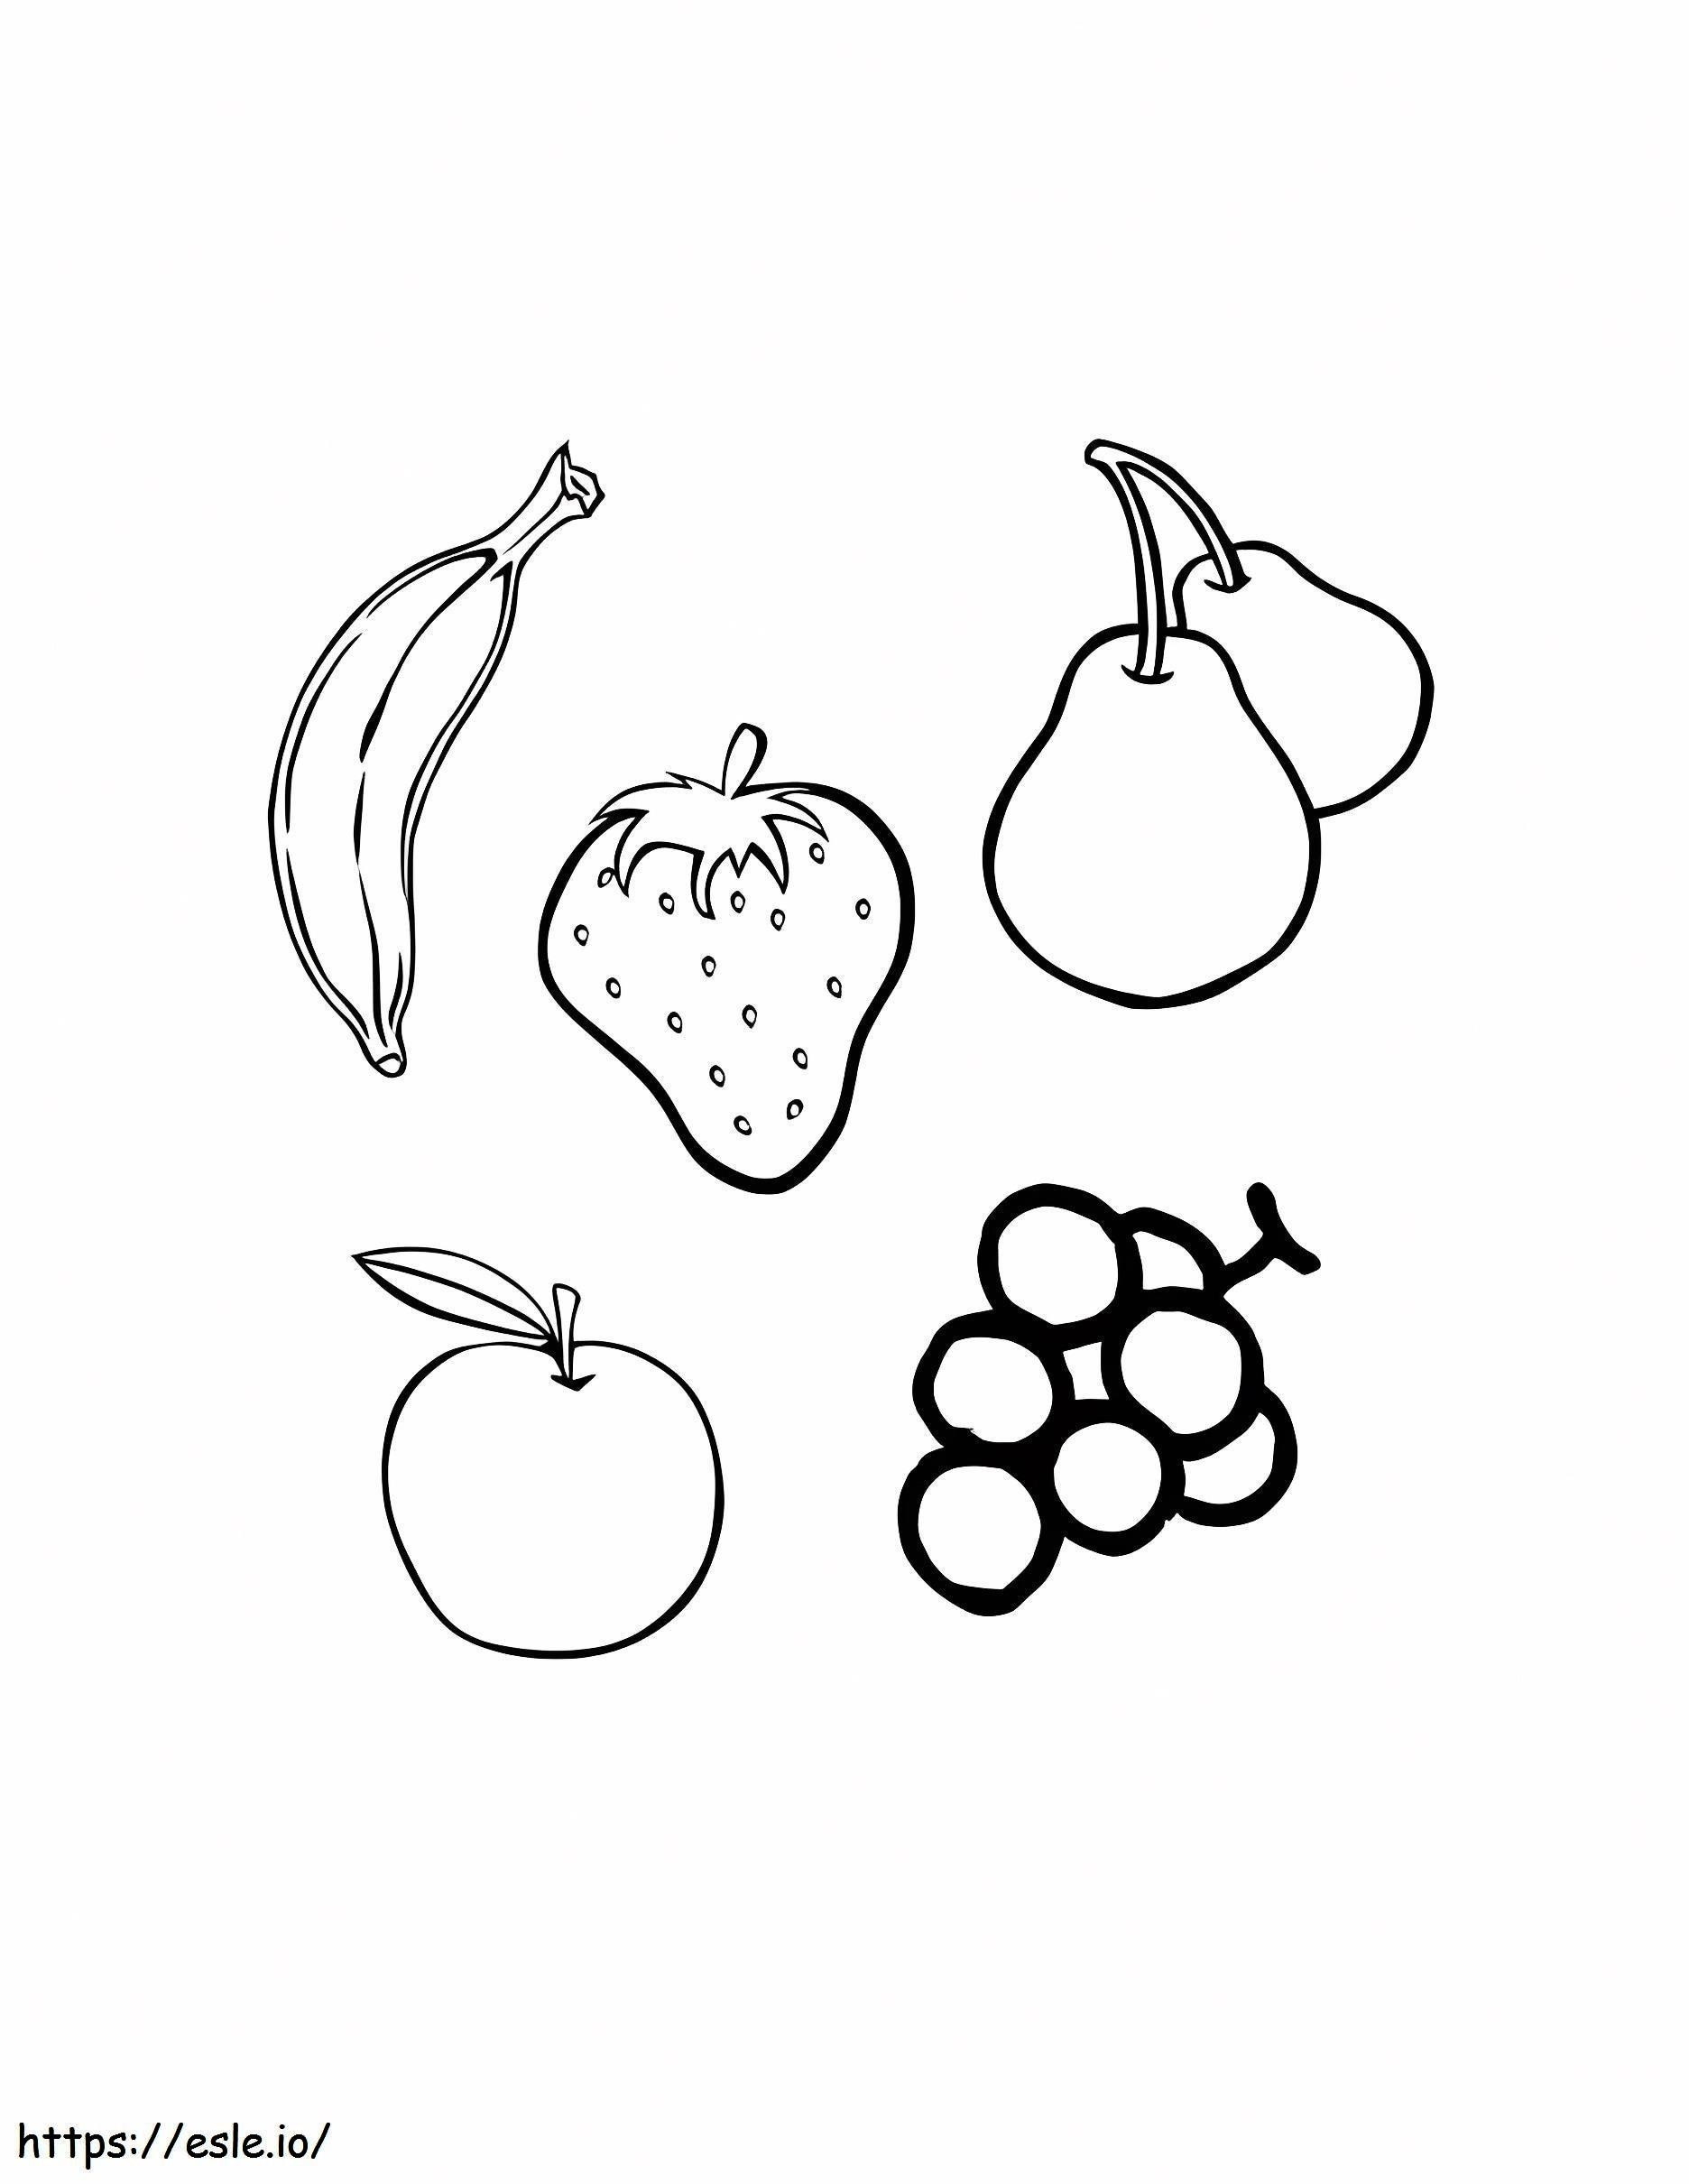 Five Fruits coloring page